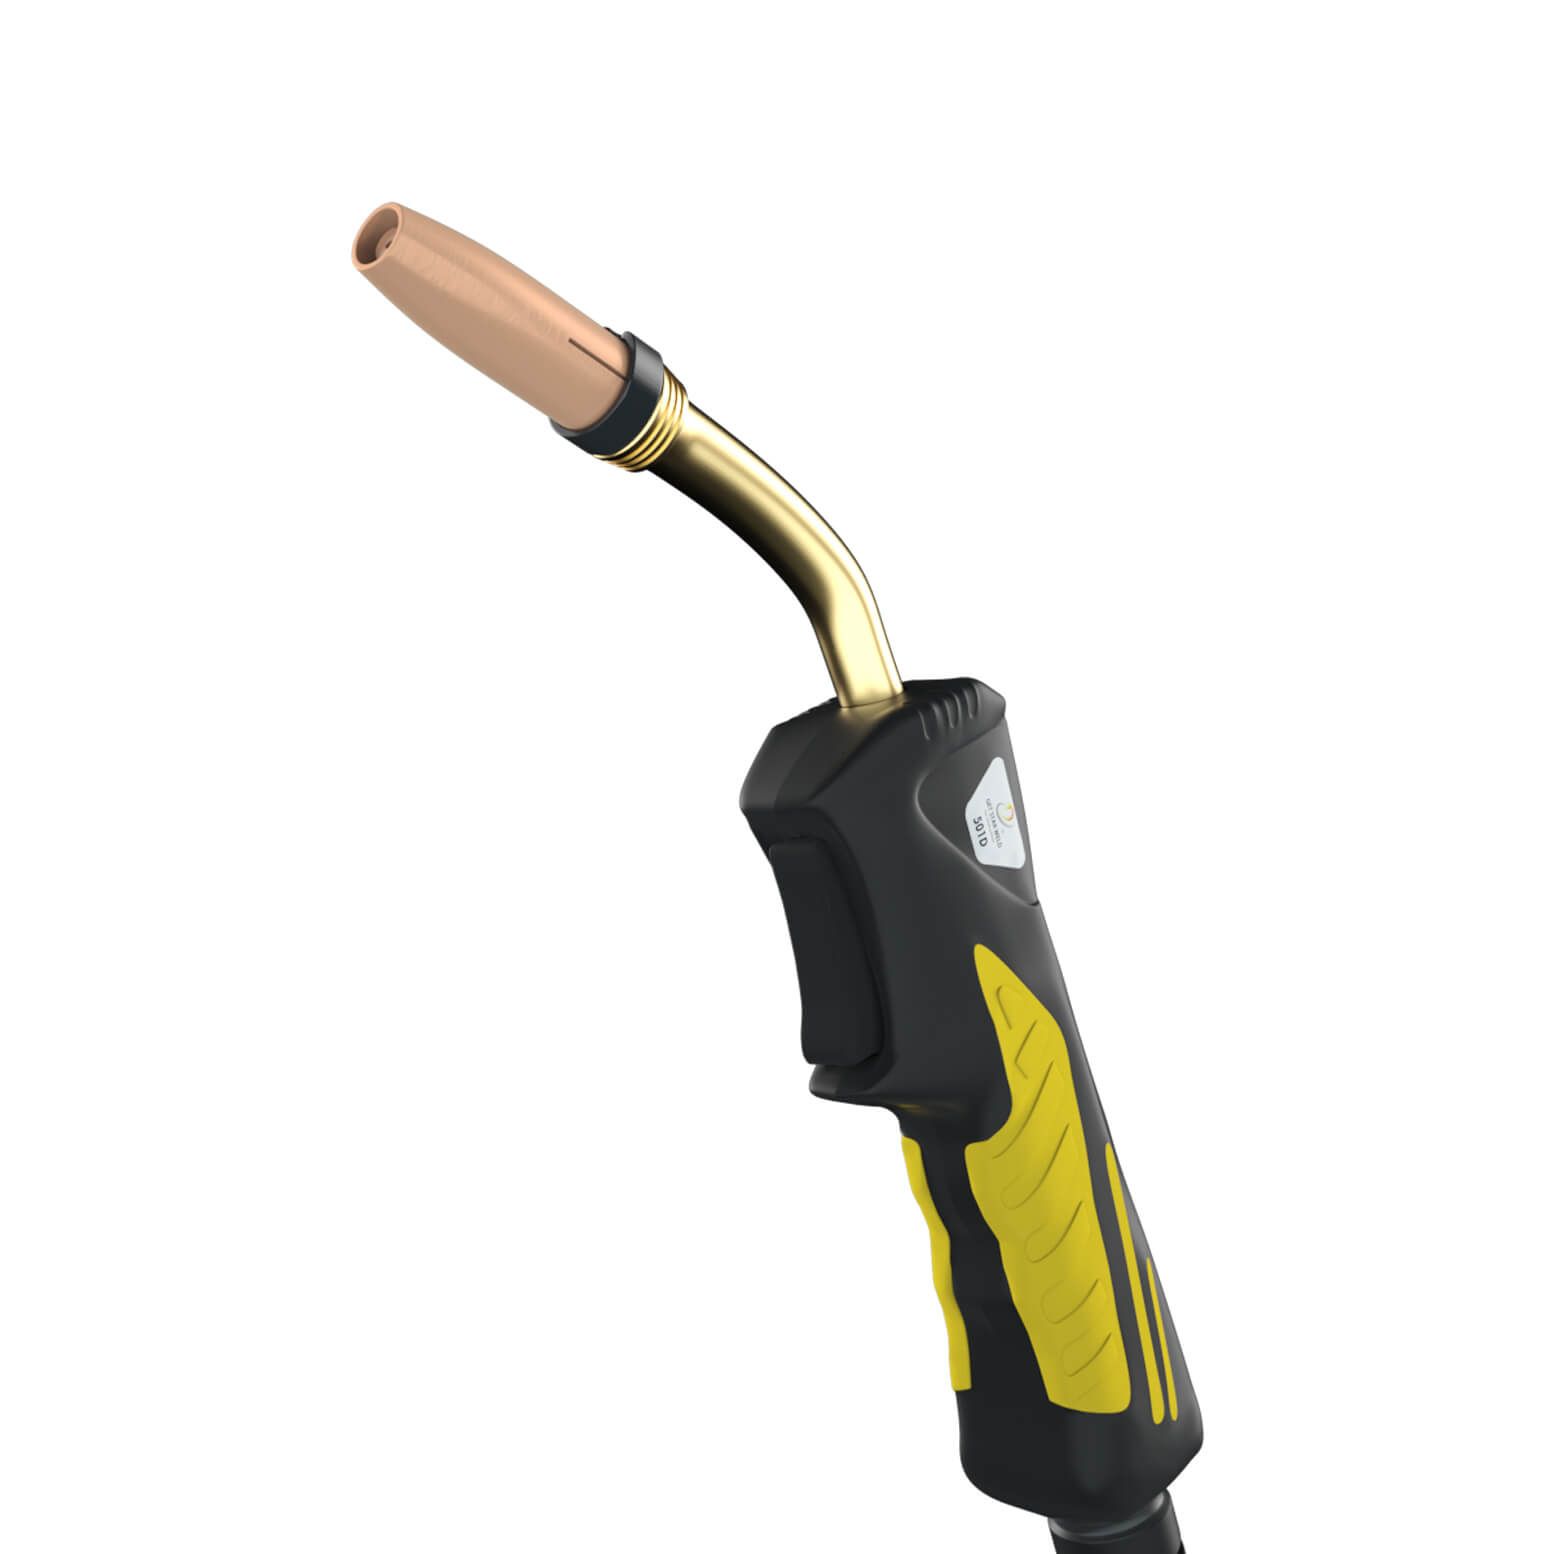 Get Star Weld EURO GSW-501D Water Cooled MIG/MAG Welding Torch